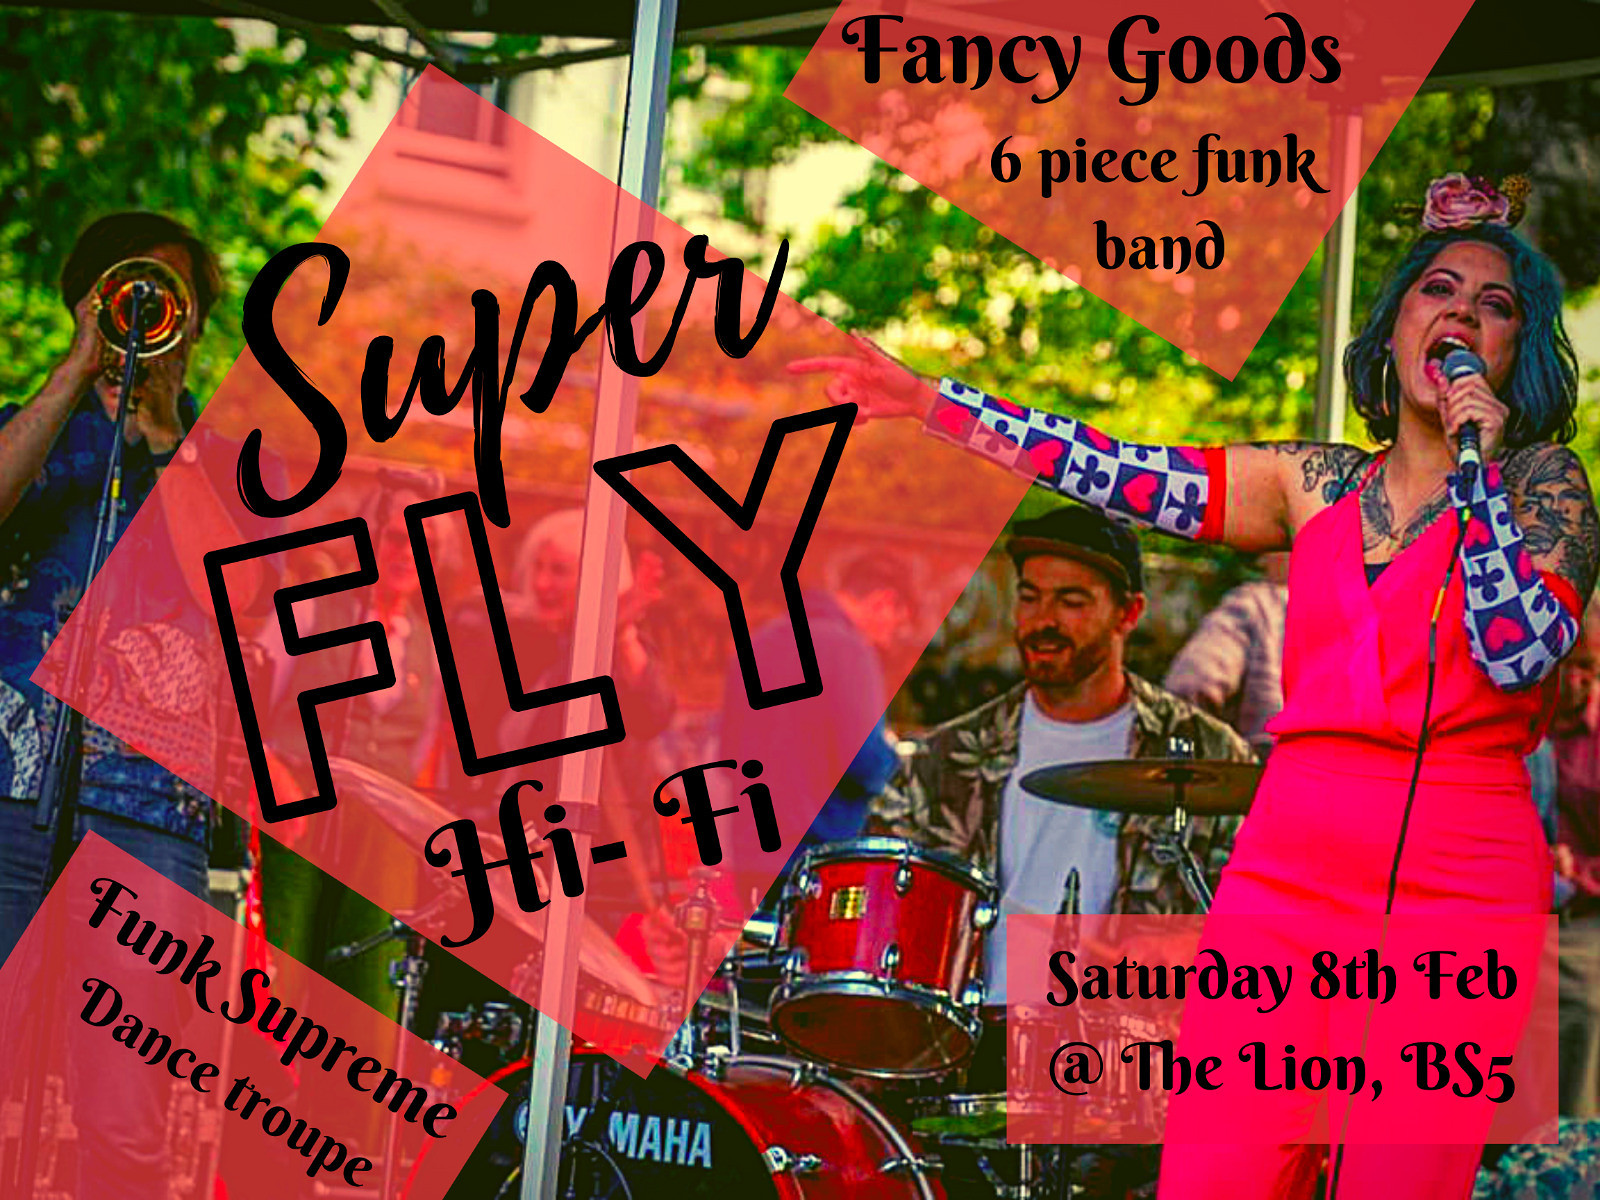 funk at the Lion with Fancy Goods at The Lion, BS5